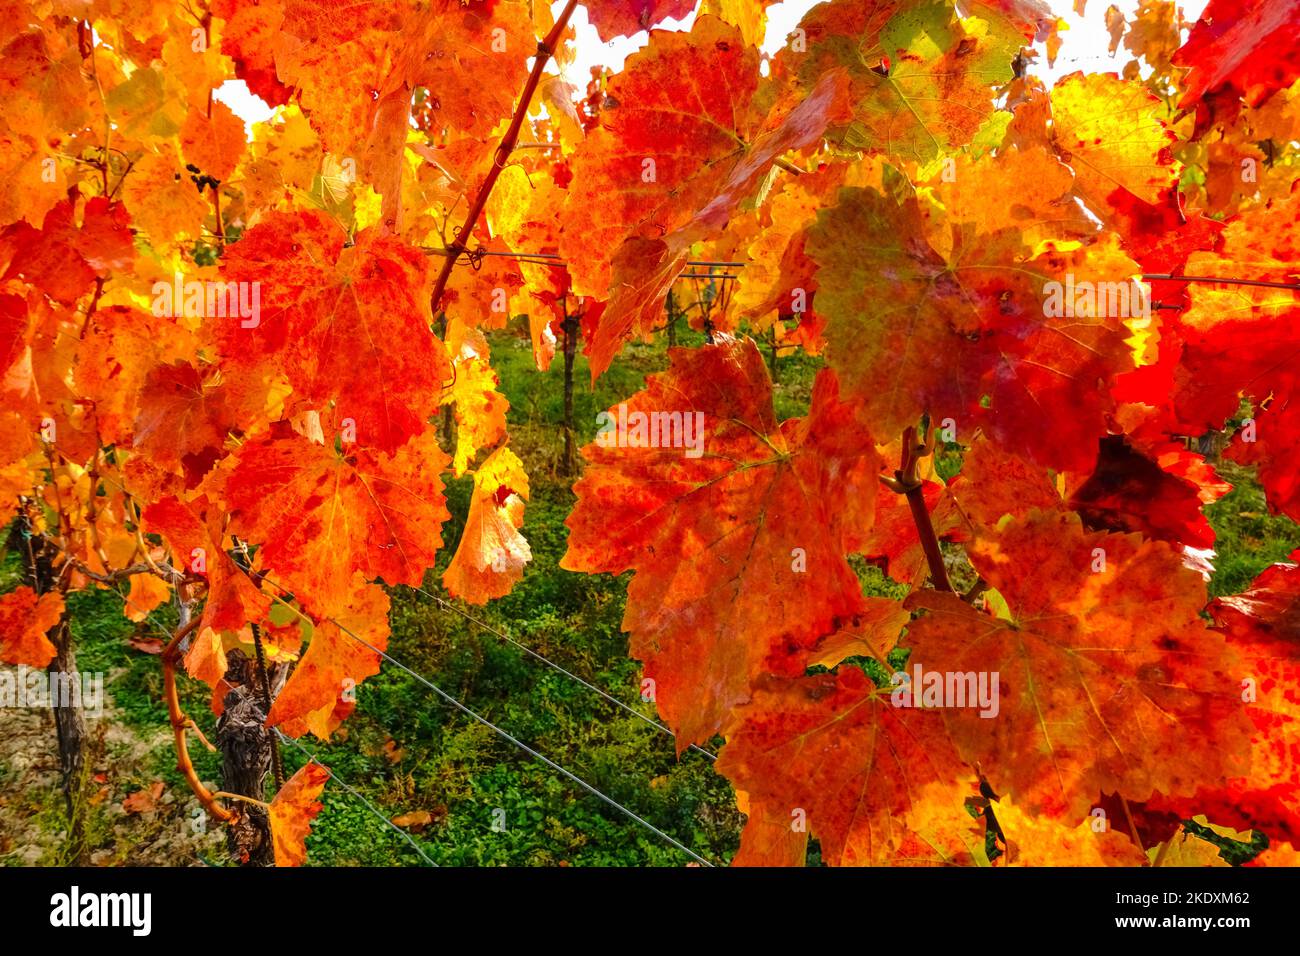 colorful leaves from vineyards in autumn detail view Stock Photo